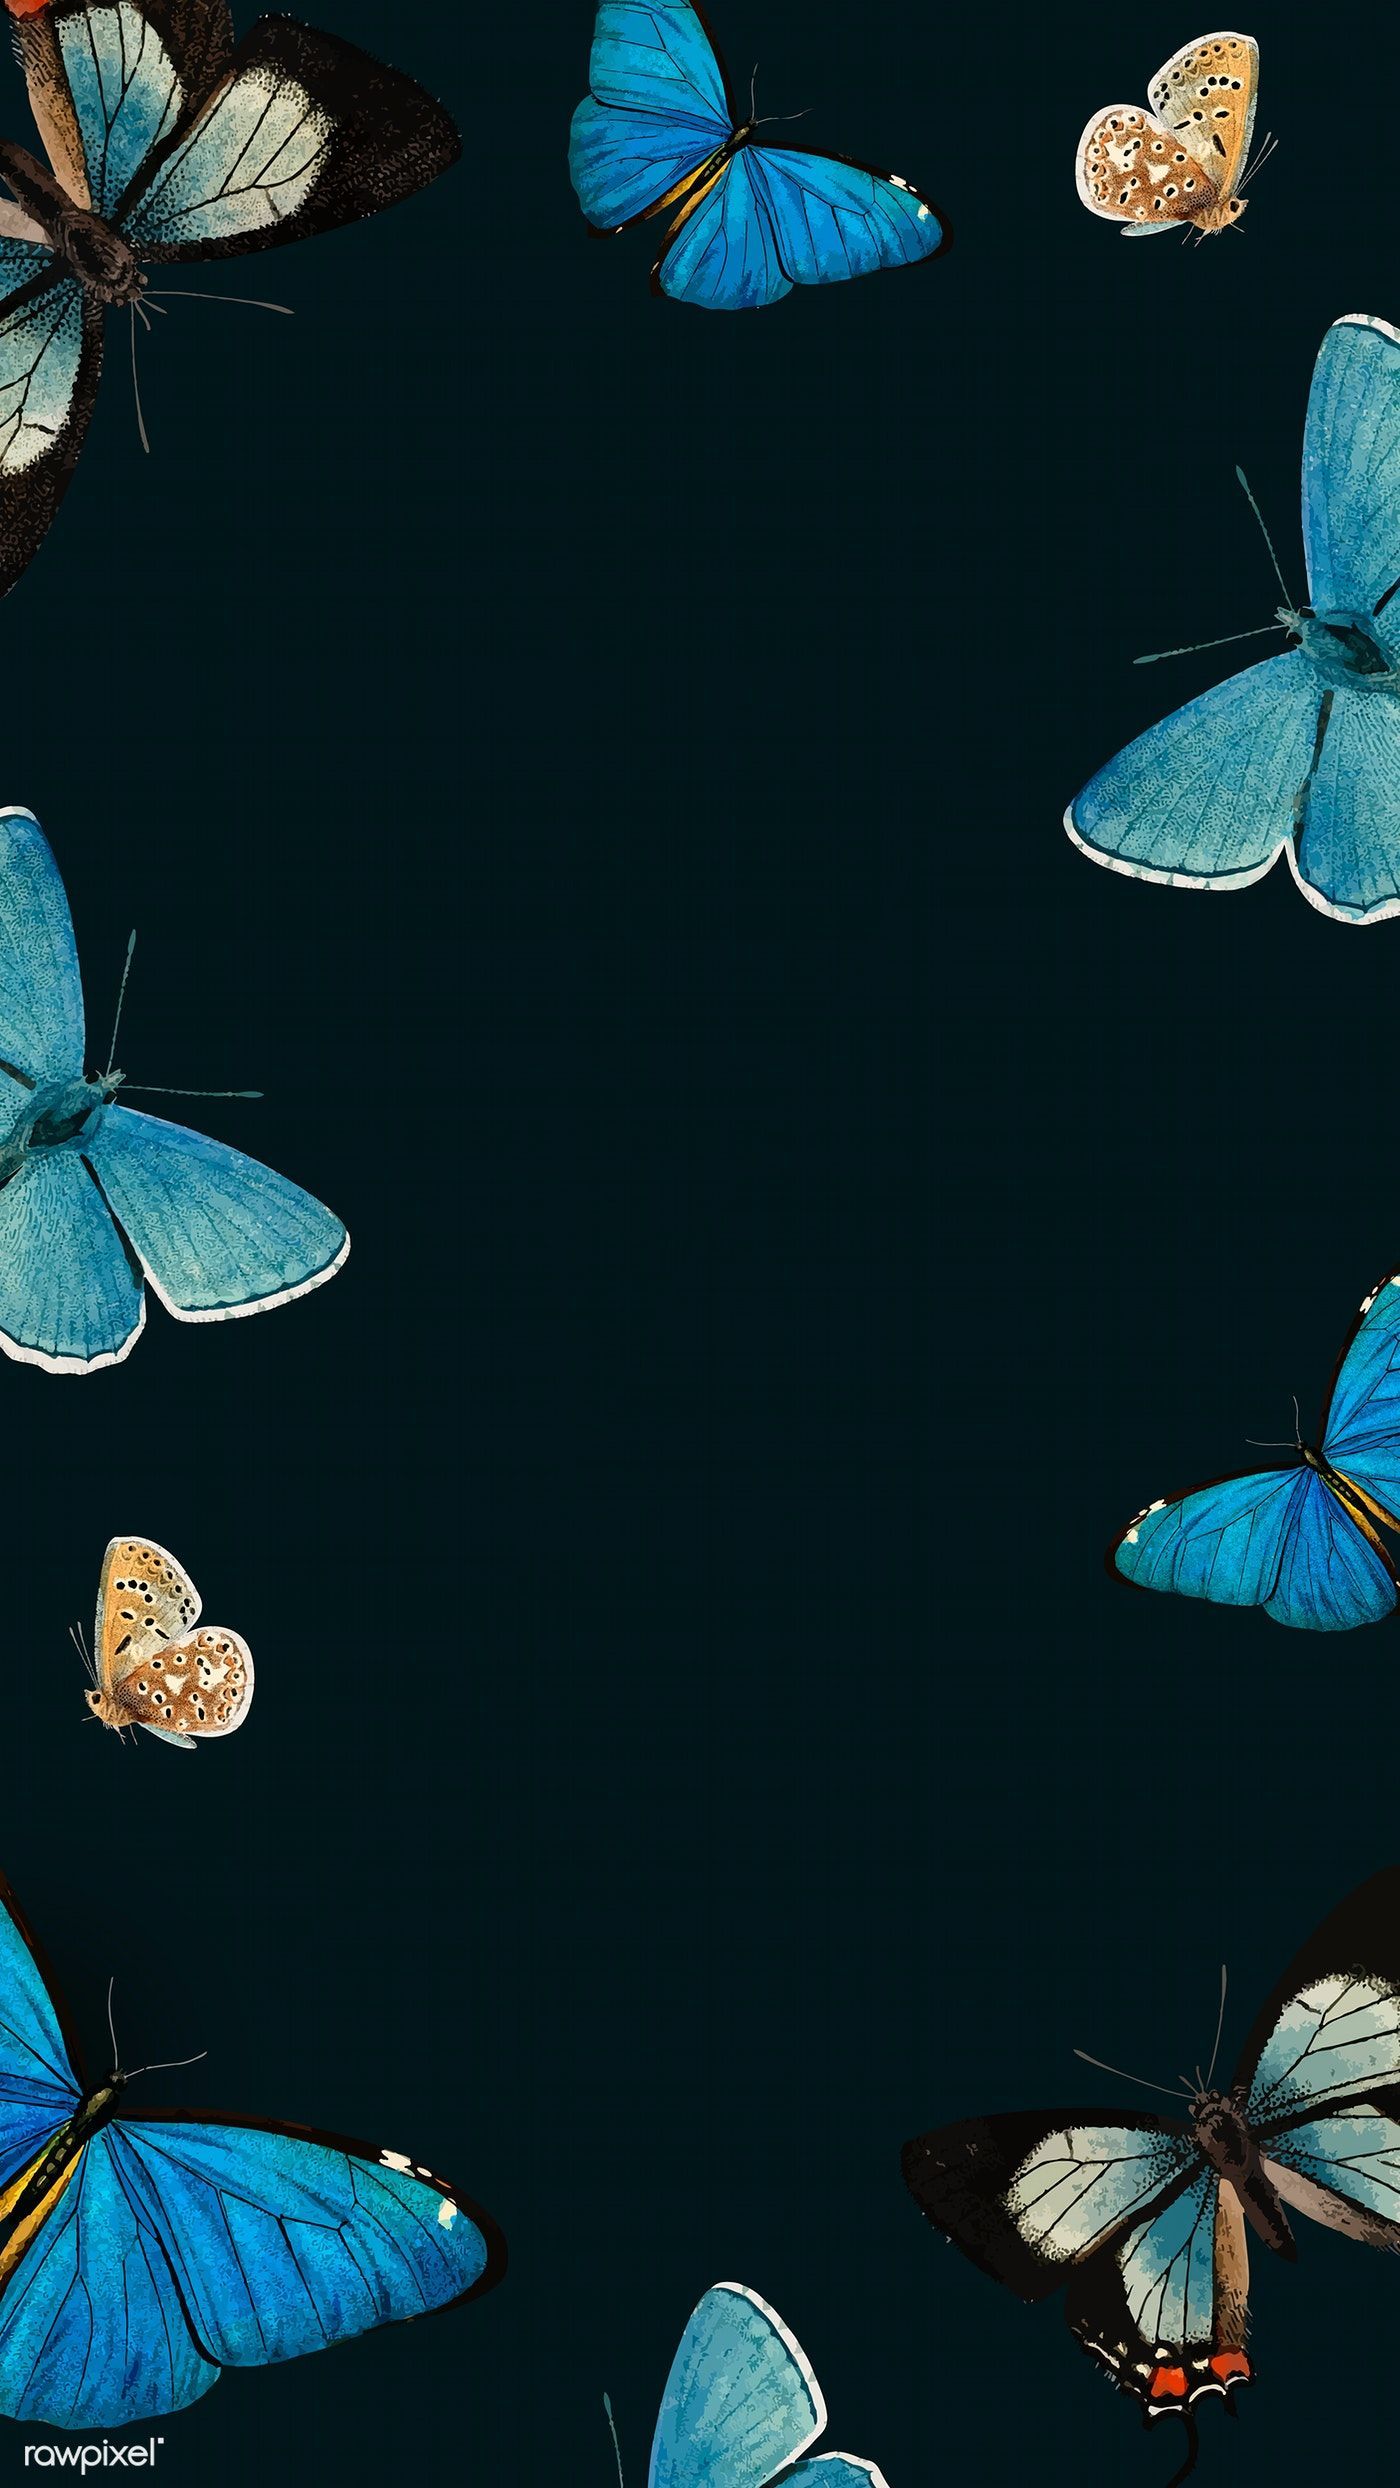 Download premium illustration of Blue butterflies patterned on